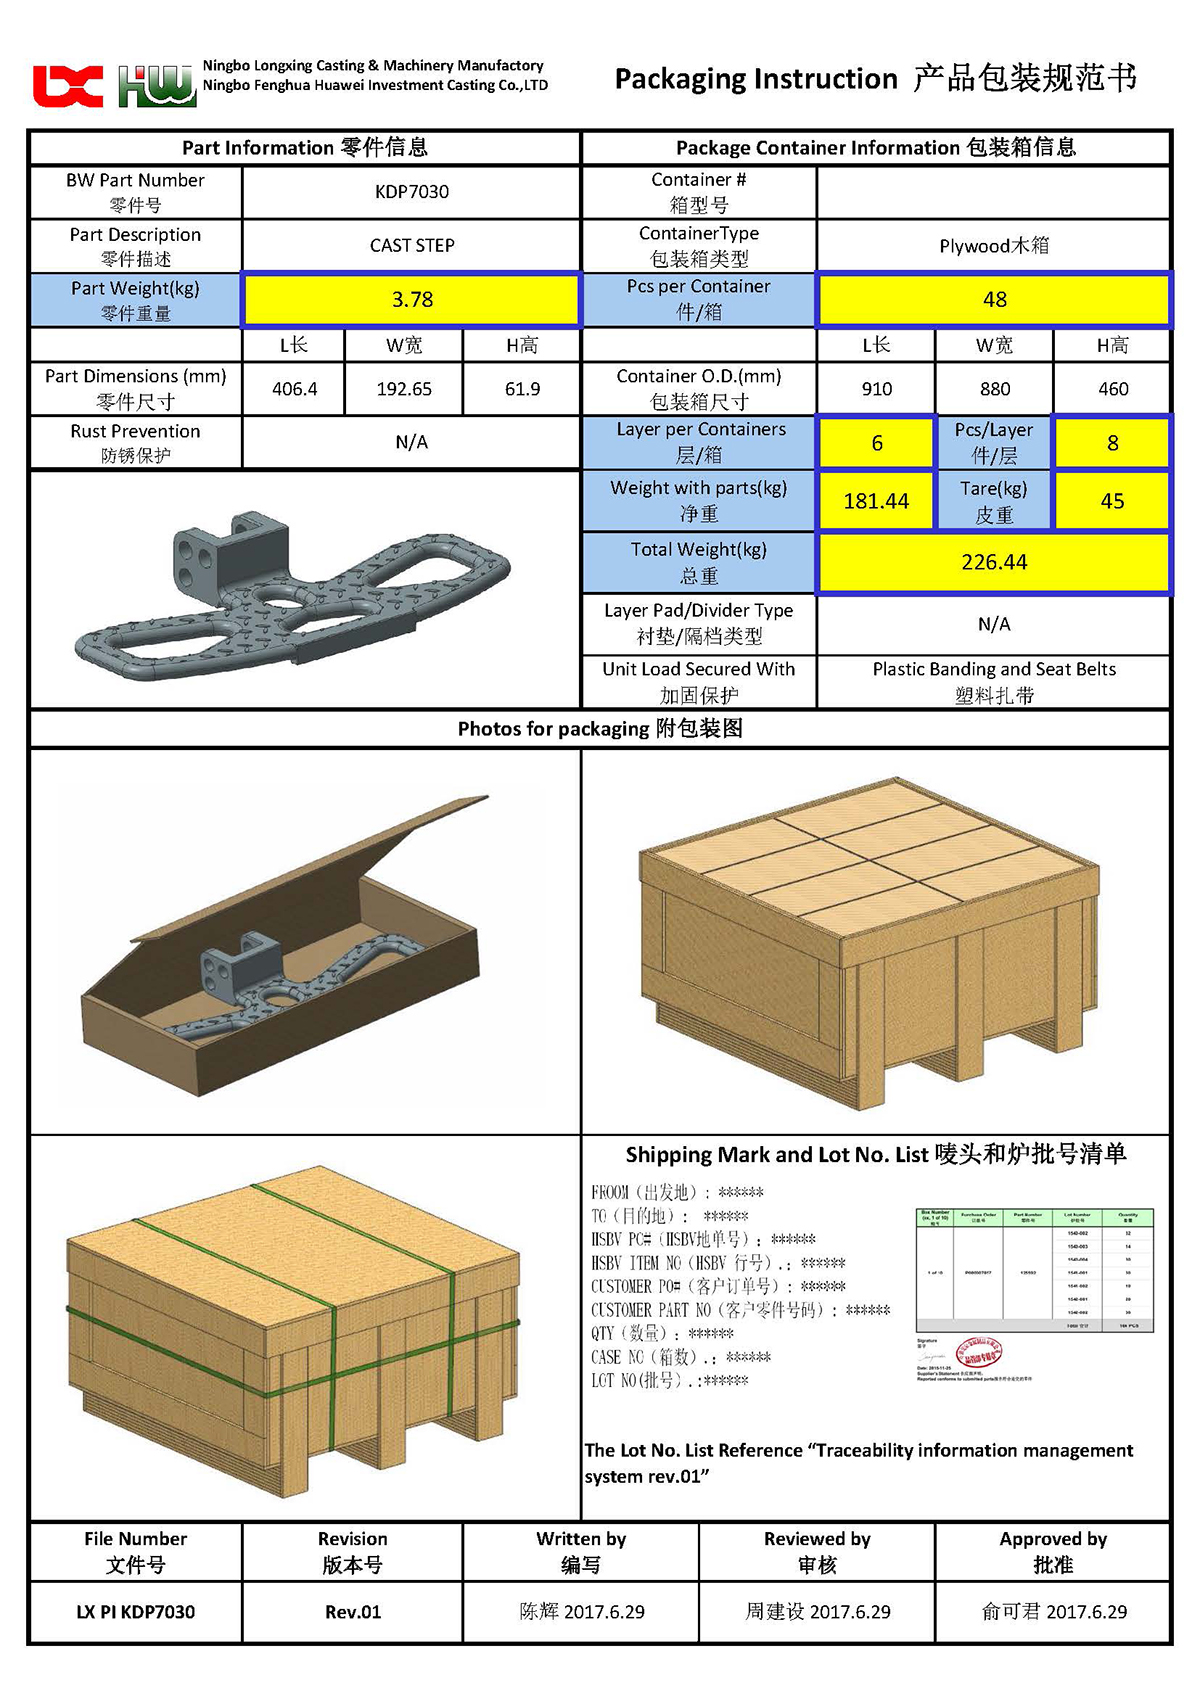 Packaging Instruction(图1)